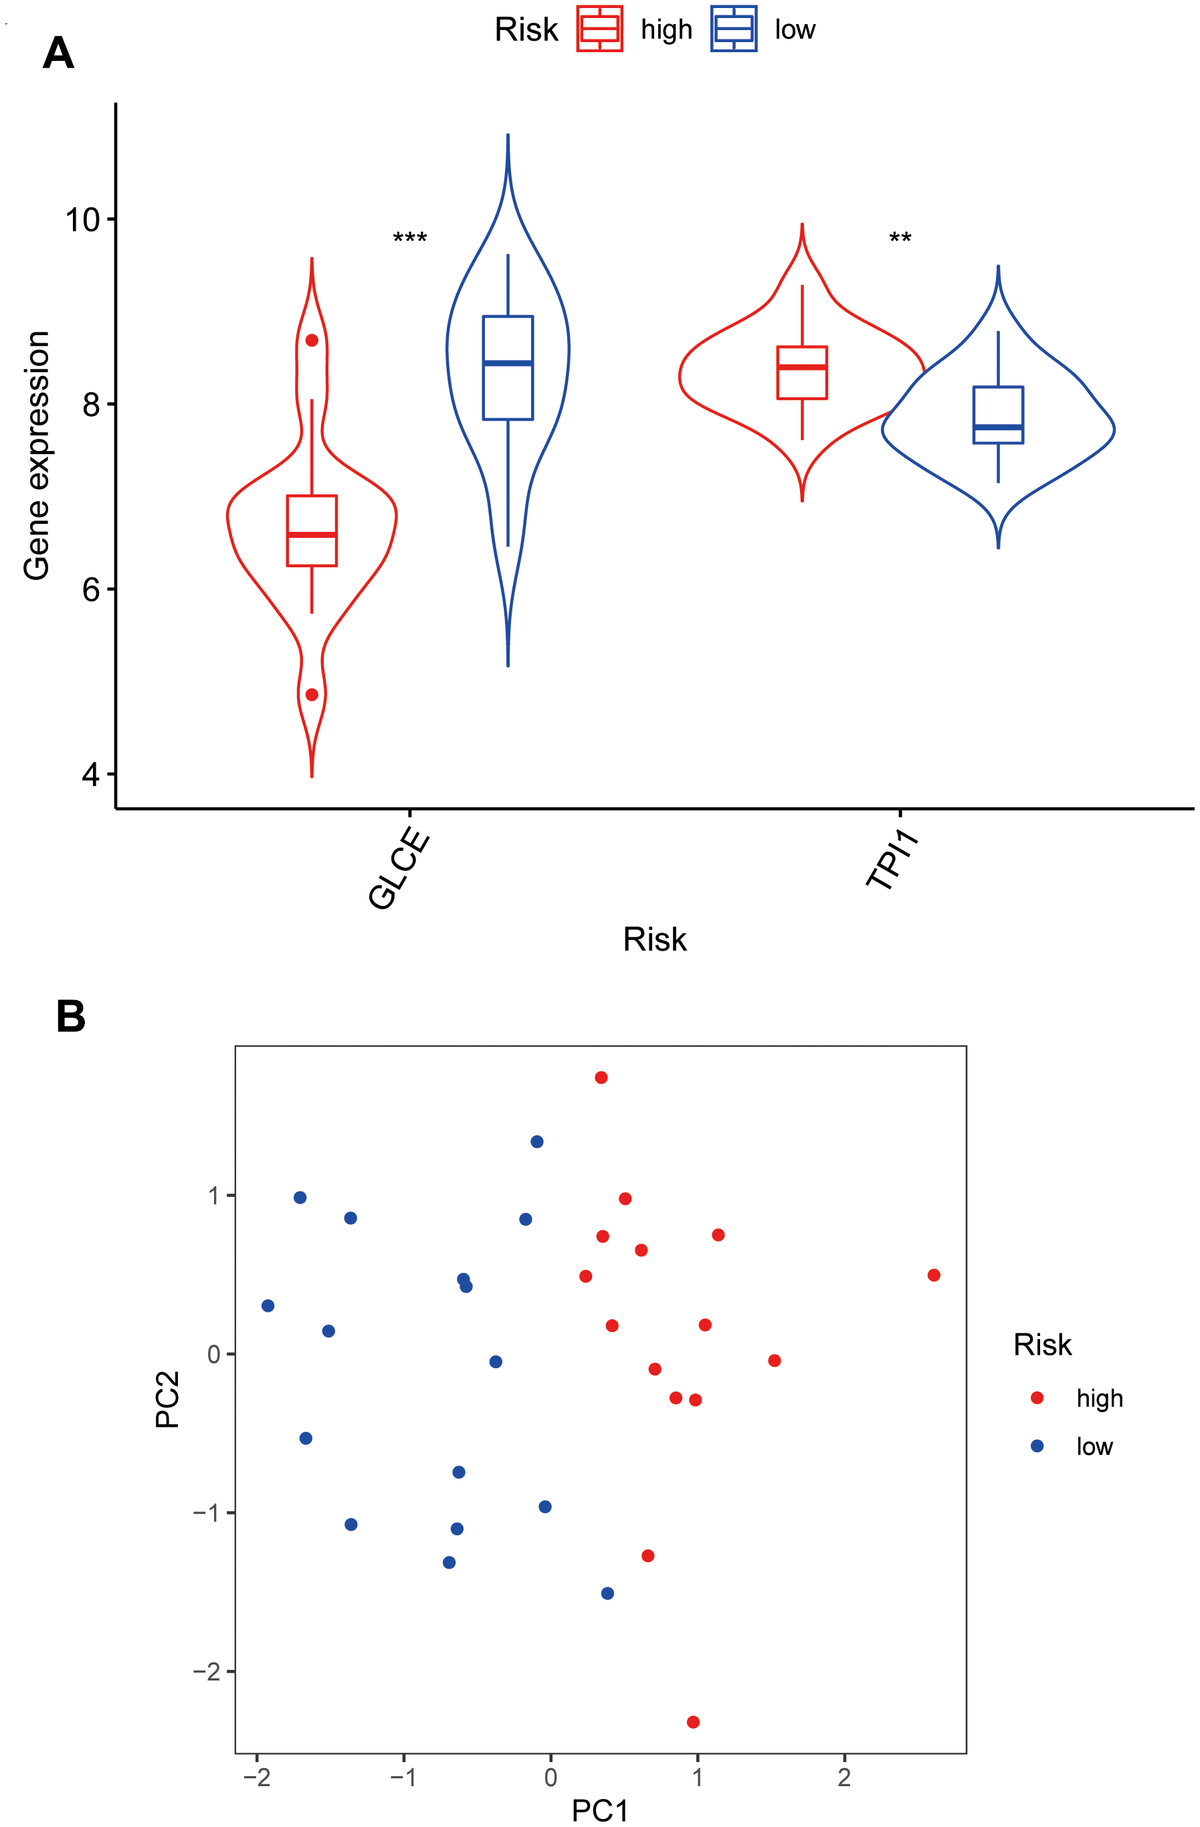 Violin plots and principal component analysis plots of model gene expression based on high and low risk. (A) The plot showing that GLCE expression values in the low-risk group are higher than those in the high-risk group; TPI1 expression values in the high-risk group are higher than those in the low-risk group. (B) The principal component analysis plot; red points representing localisation of the high-risk group on the right side of the PC1 axis and that of the low-risk group on the left side of the PC1 axis.